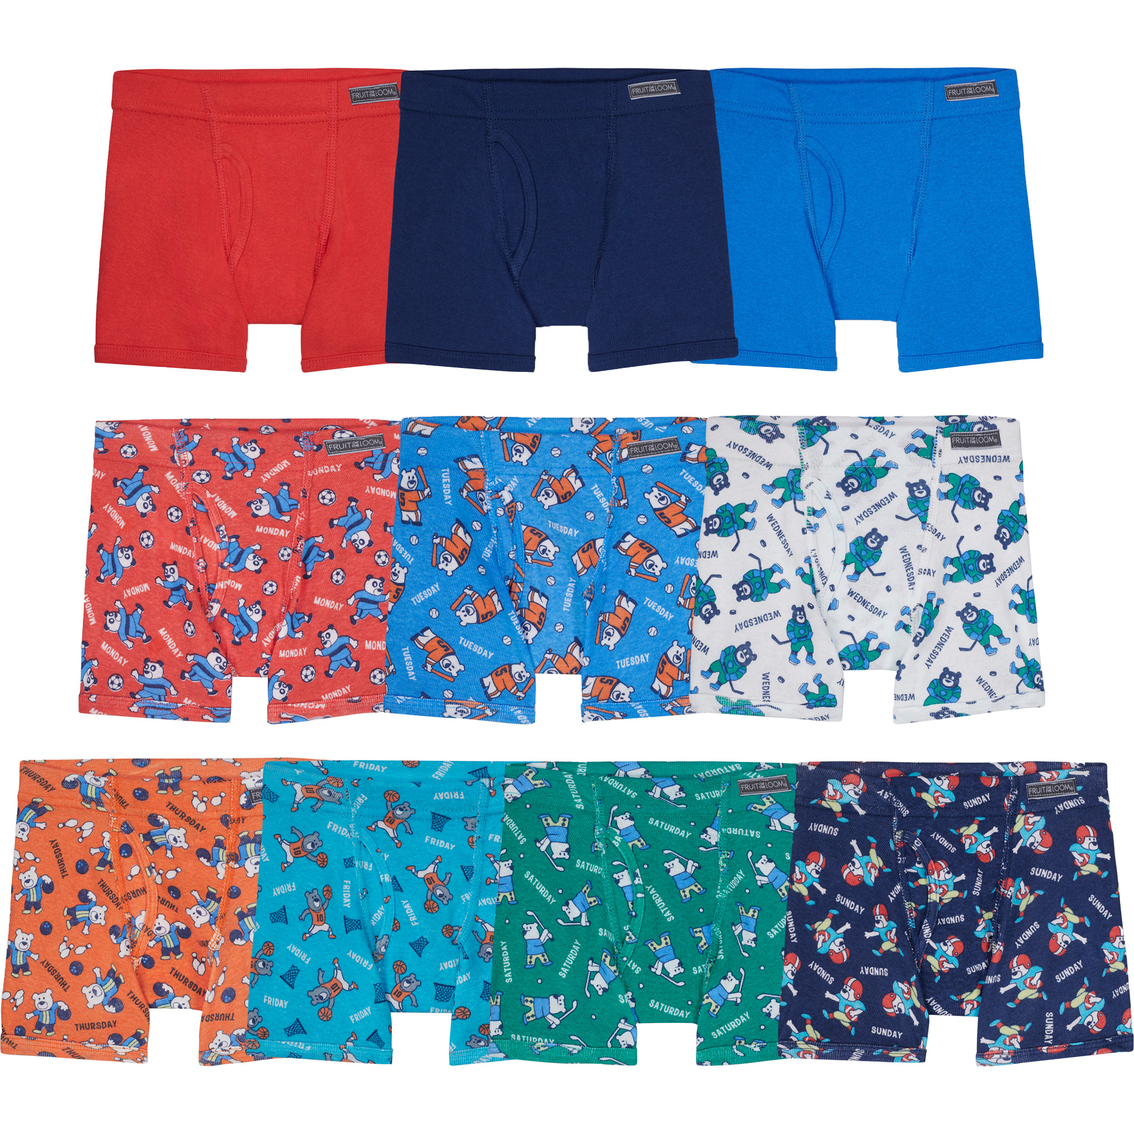 Fruit of the Loom Toddler Boys Print Solid Boxer Brief 10 pk. - Image 2 of 2